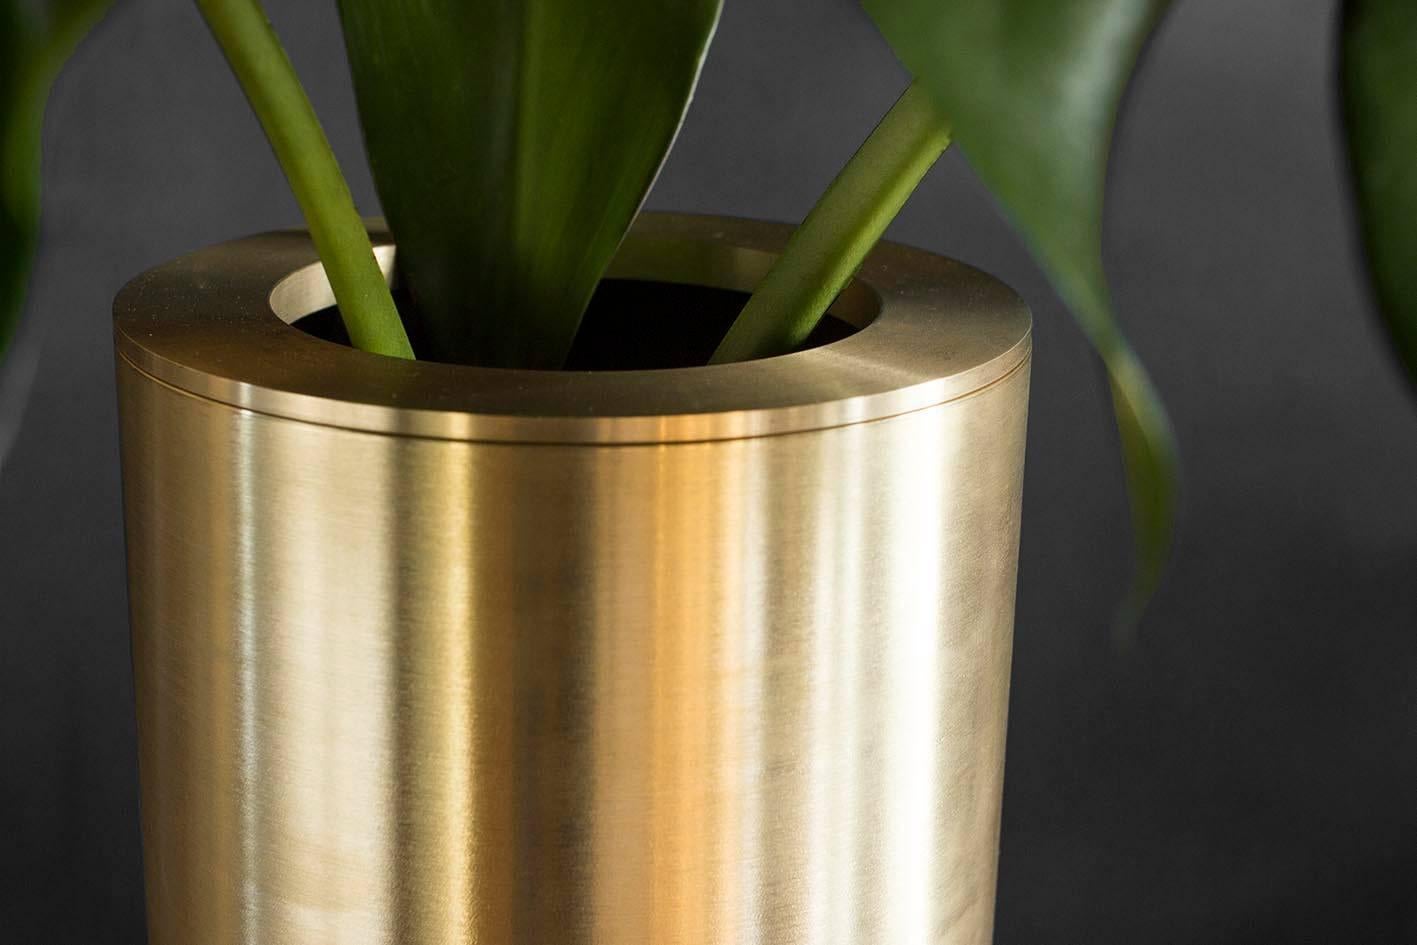 Cofete brass vase by Jan Garncarek
Dimensions: 37 x 18 x 18 cm
Material: Brass
Handcrafted by Jan Garncarek.
Signed 

This unique vase was designed during the designer's travels around the Canary Islands. Its mystical and minimalist form was